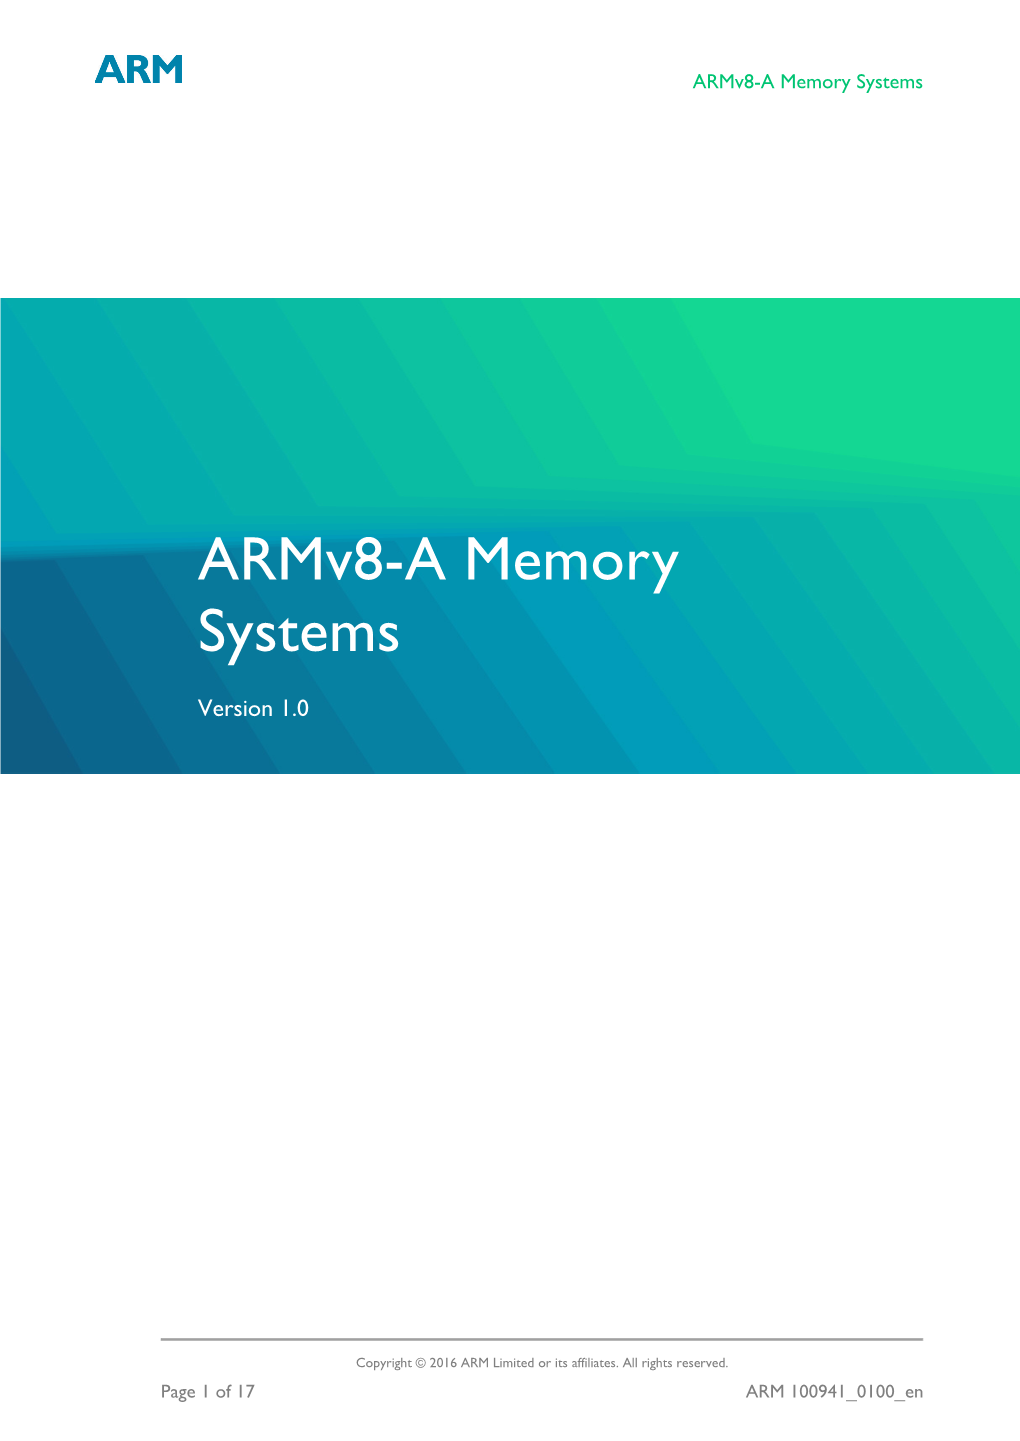 Connect User Guide Armv8-A Memory Systems